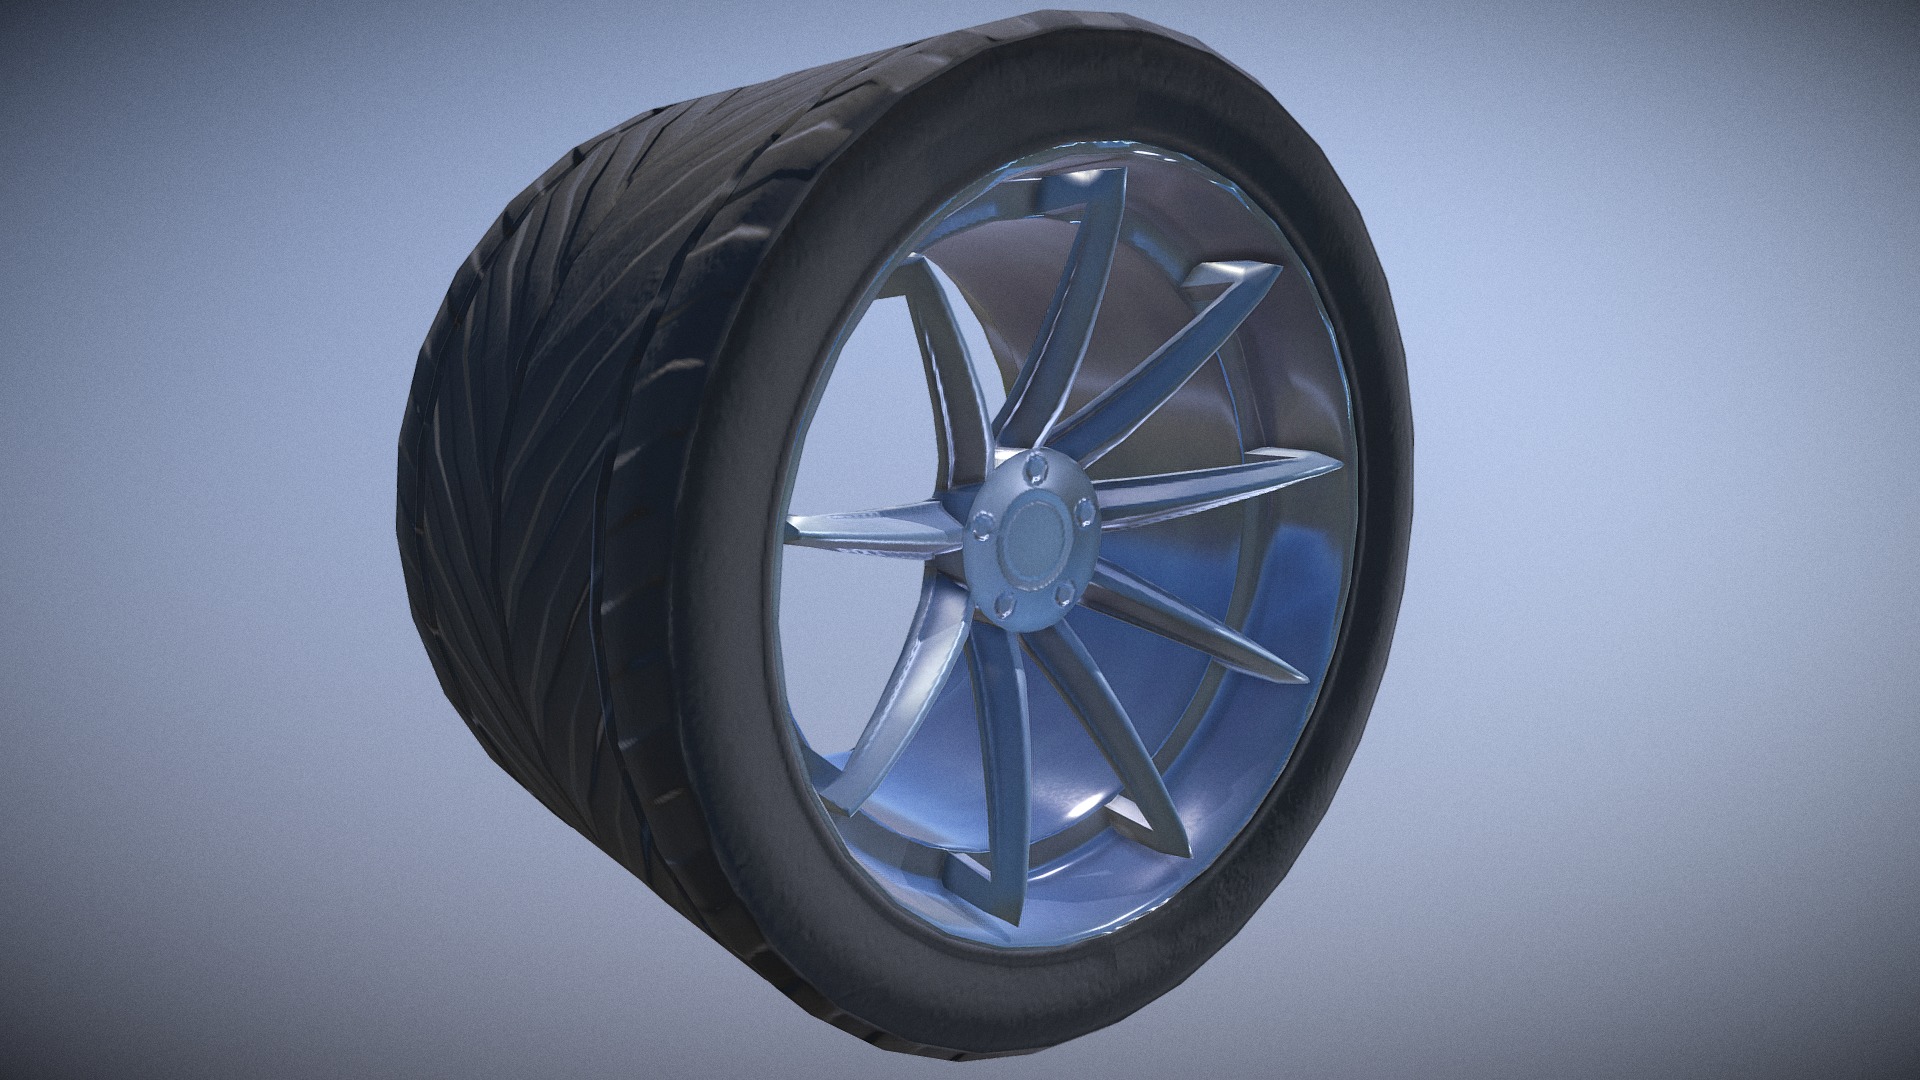 3D model Wheel – Aro 20 - This is a 3D model of the Wheel - Aro 20. The 3D model is about a silver car emblem.